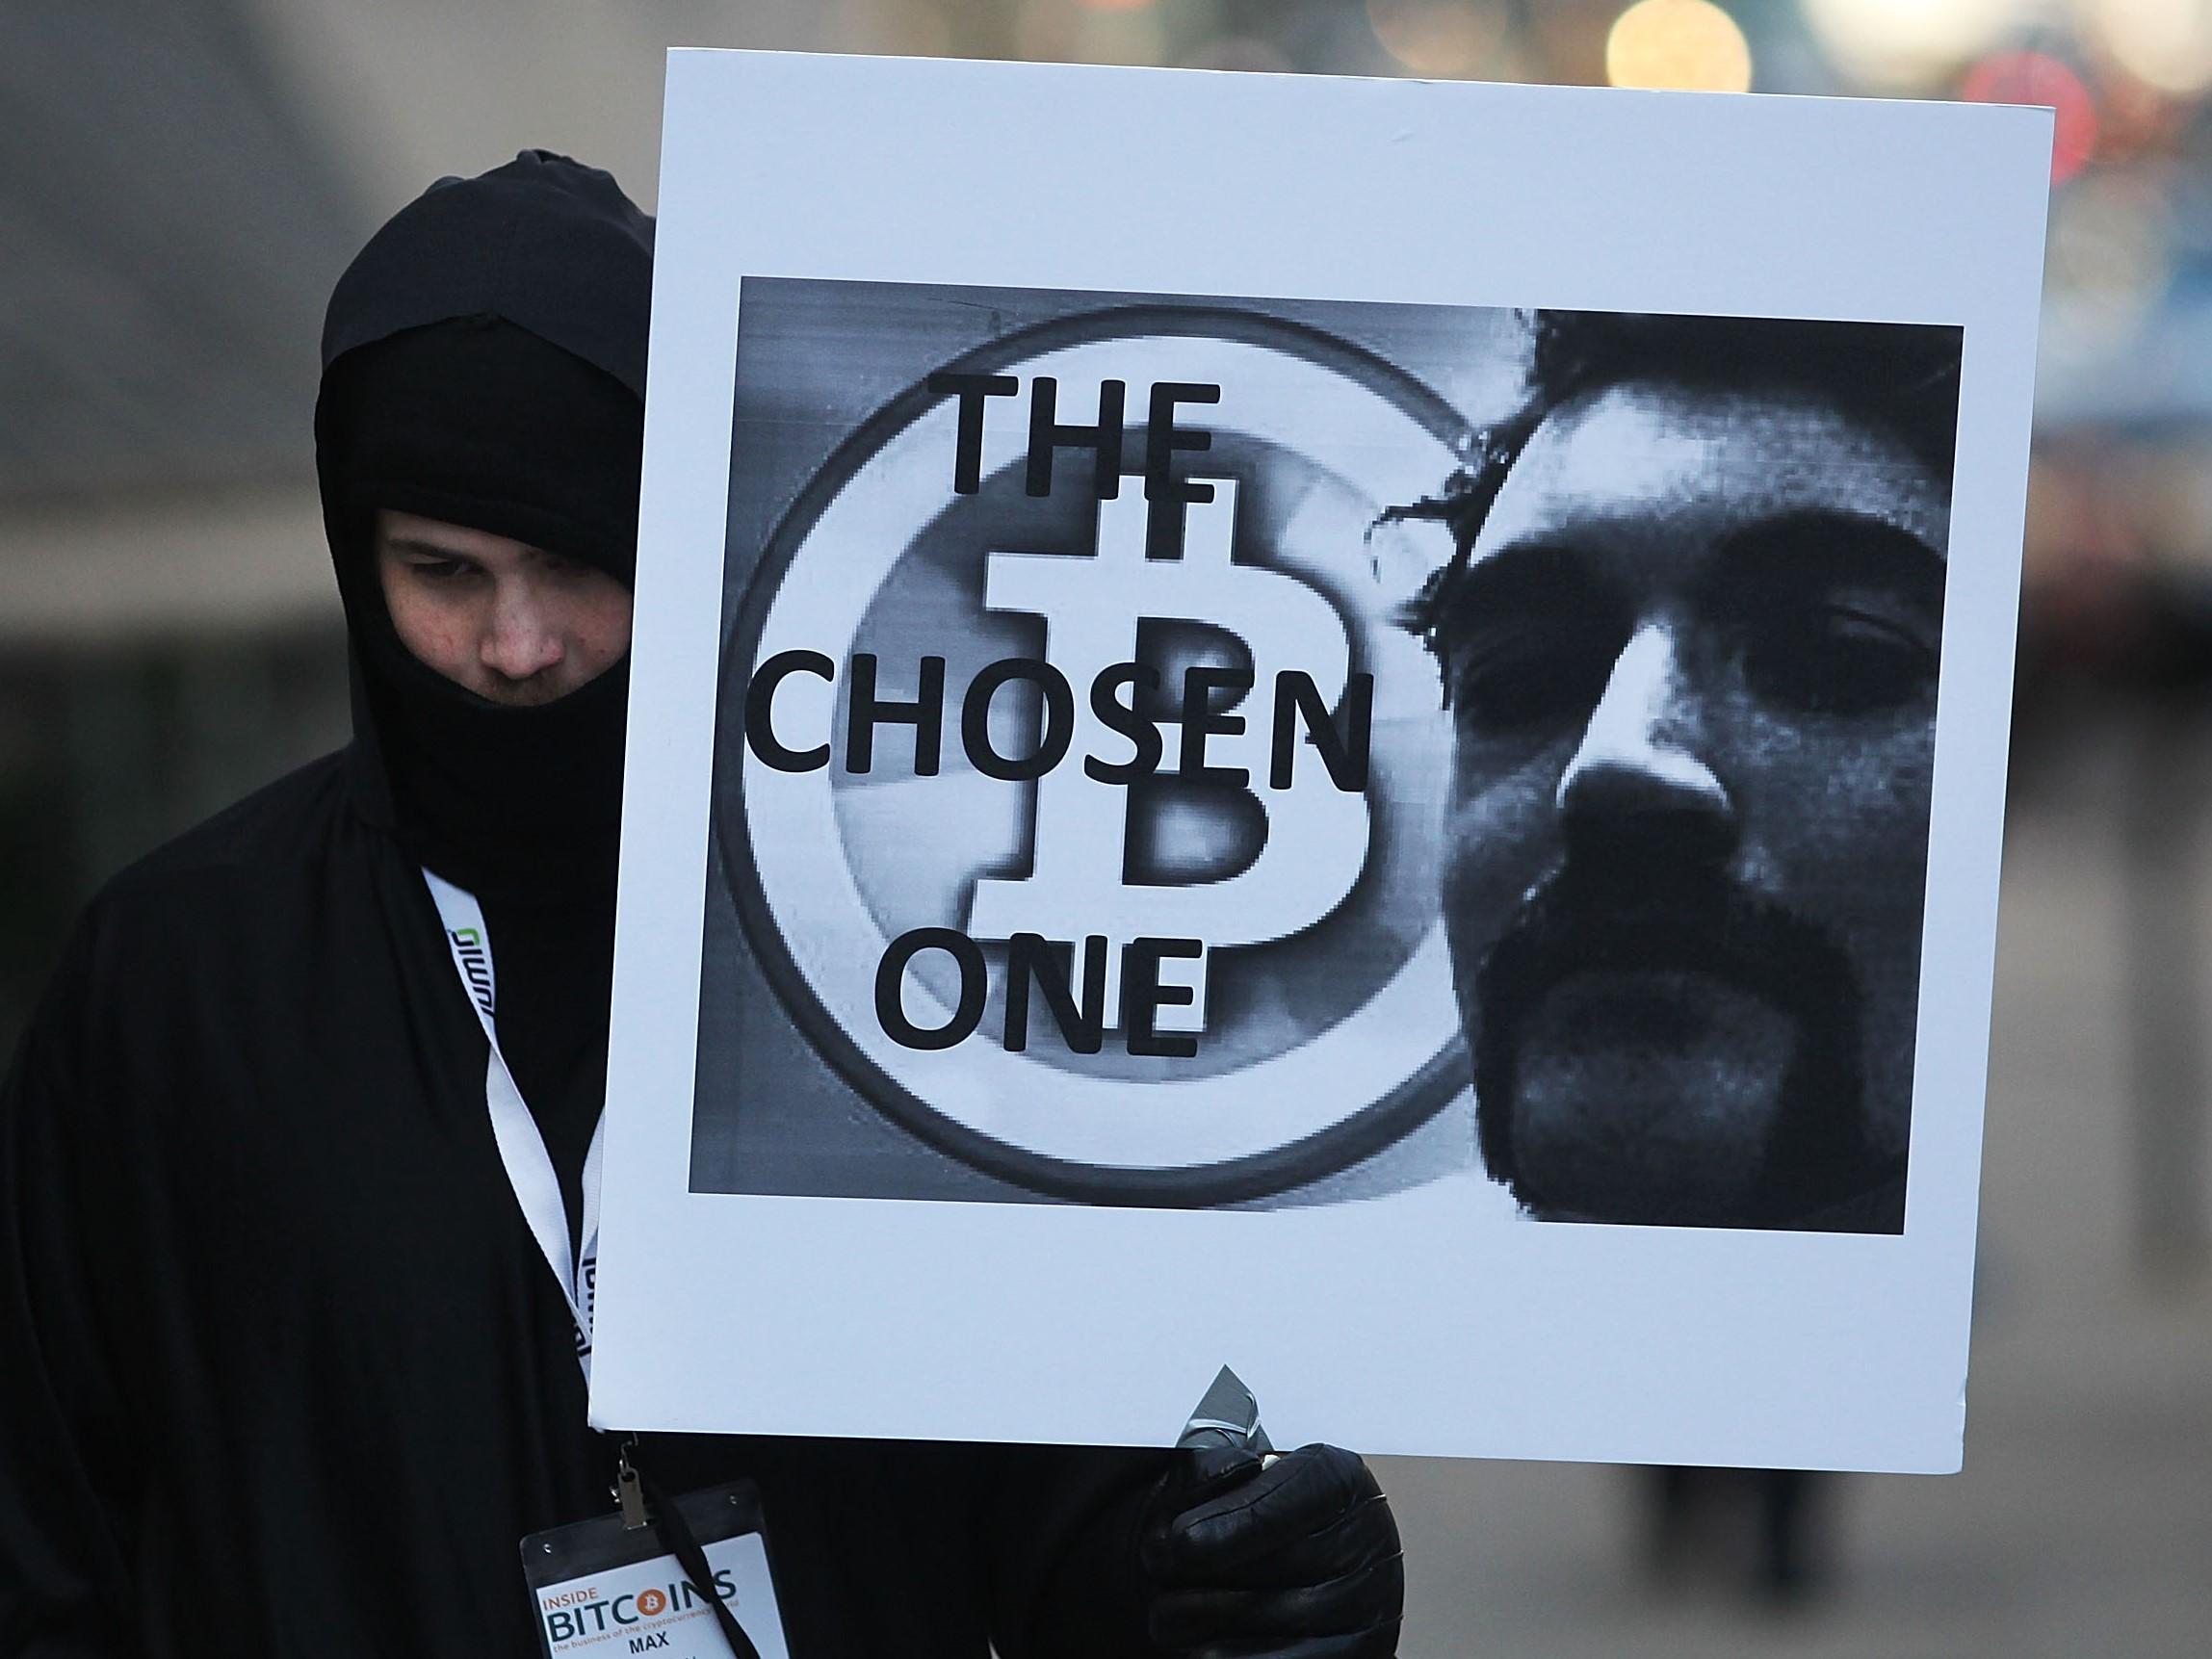 A supporter of Ross Ulbricht in front of a New York court house during the Silk Road founder's trial on 13 January, 2015